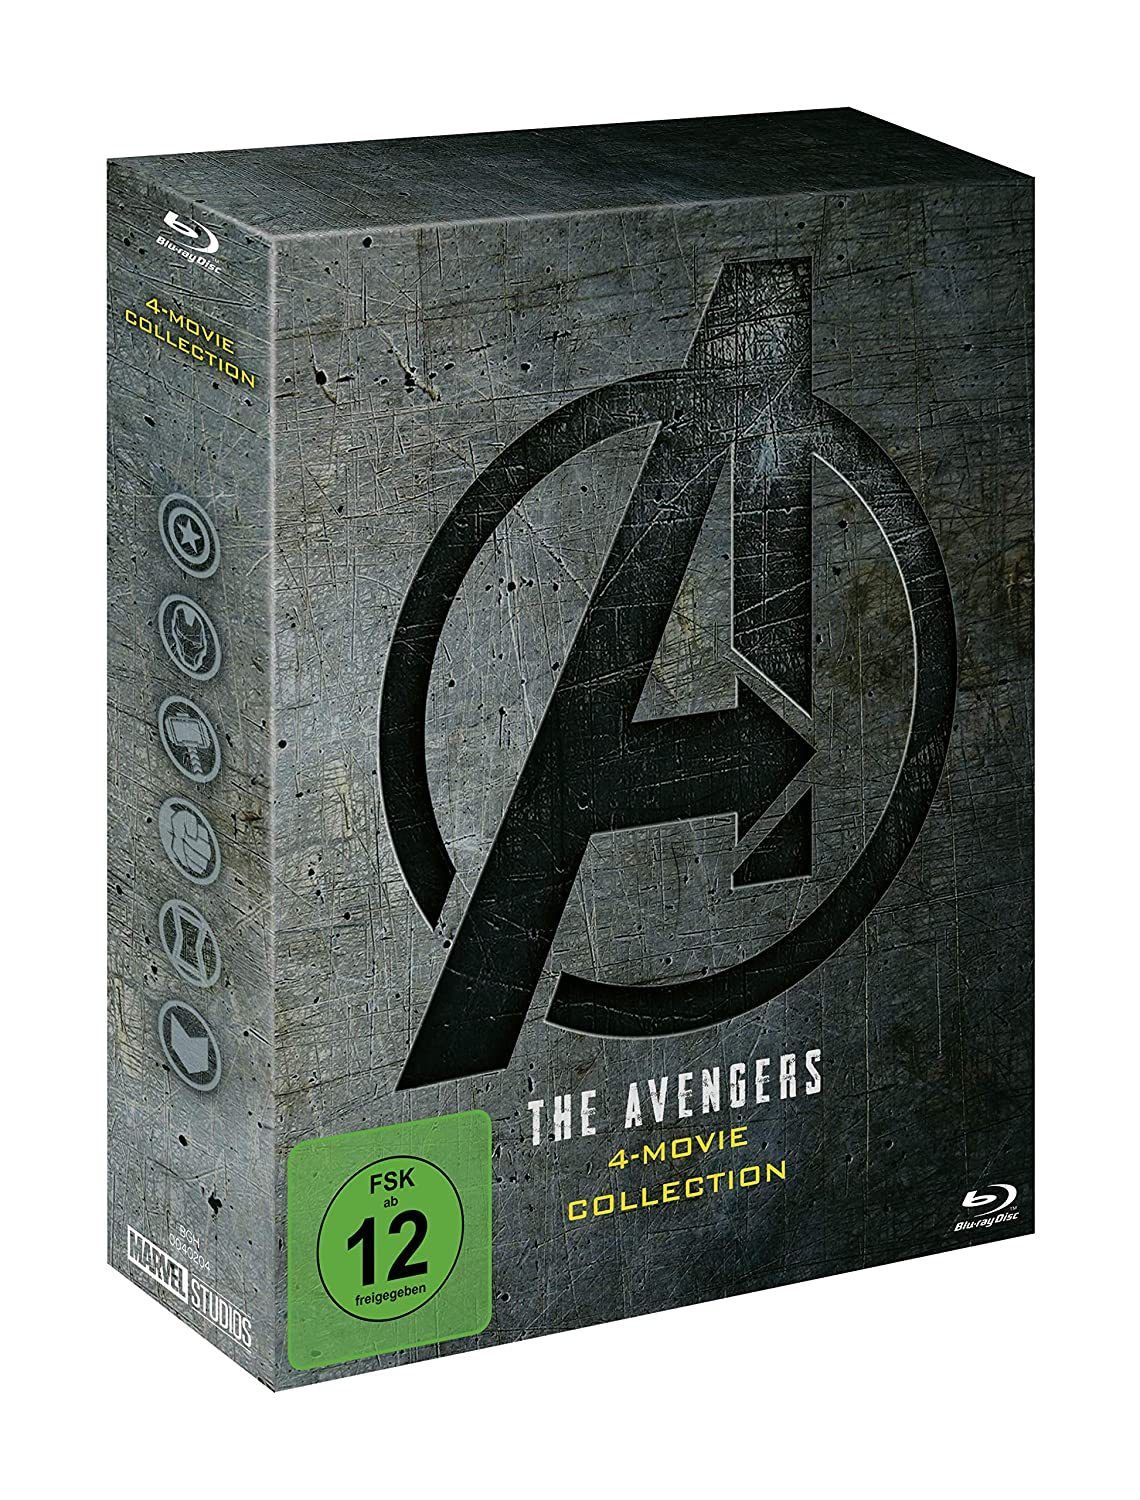 Image of The Avengers 4-Movie Collection